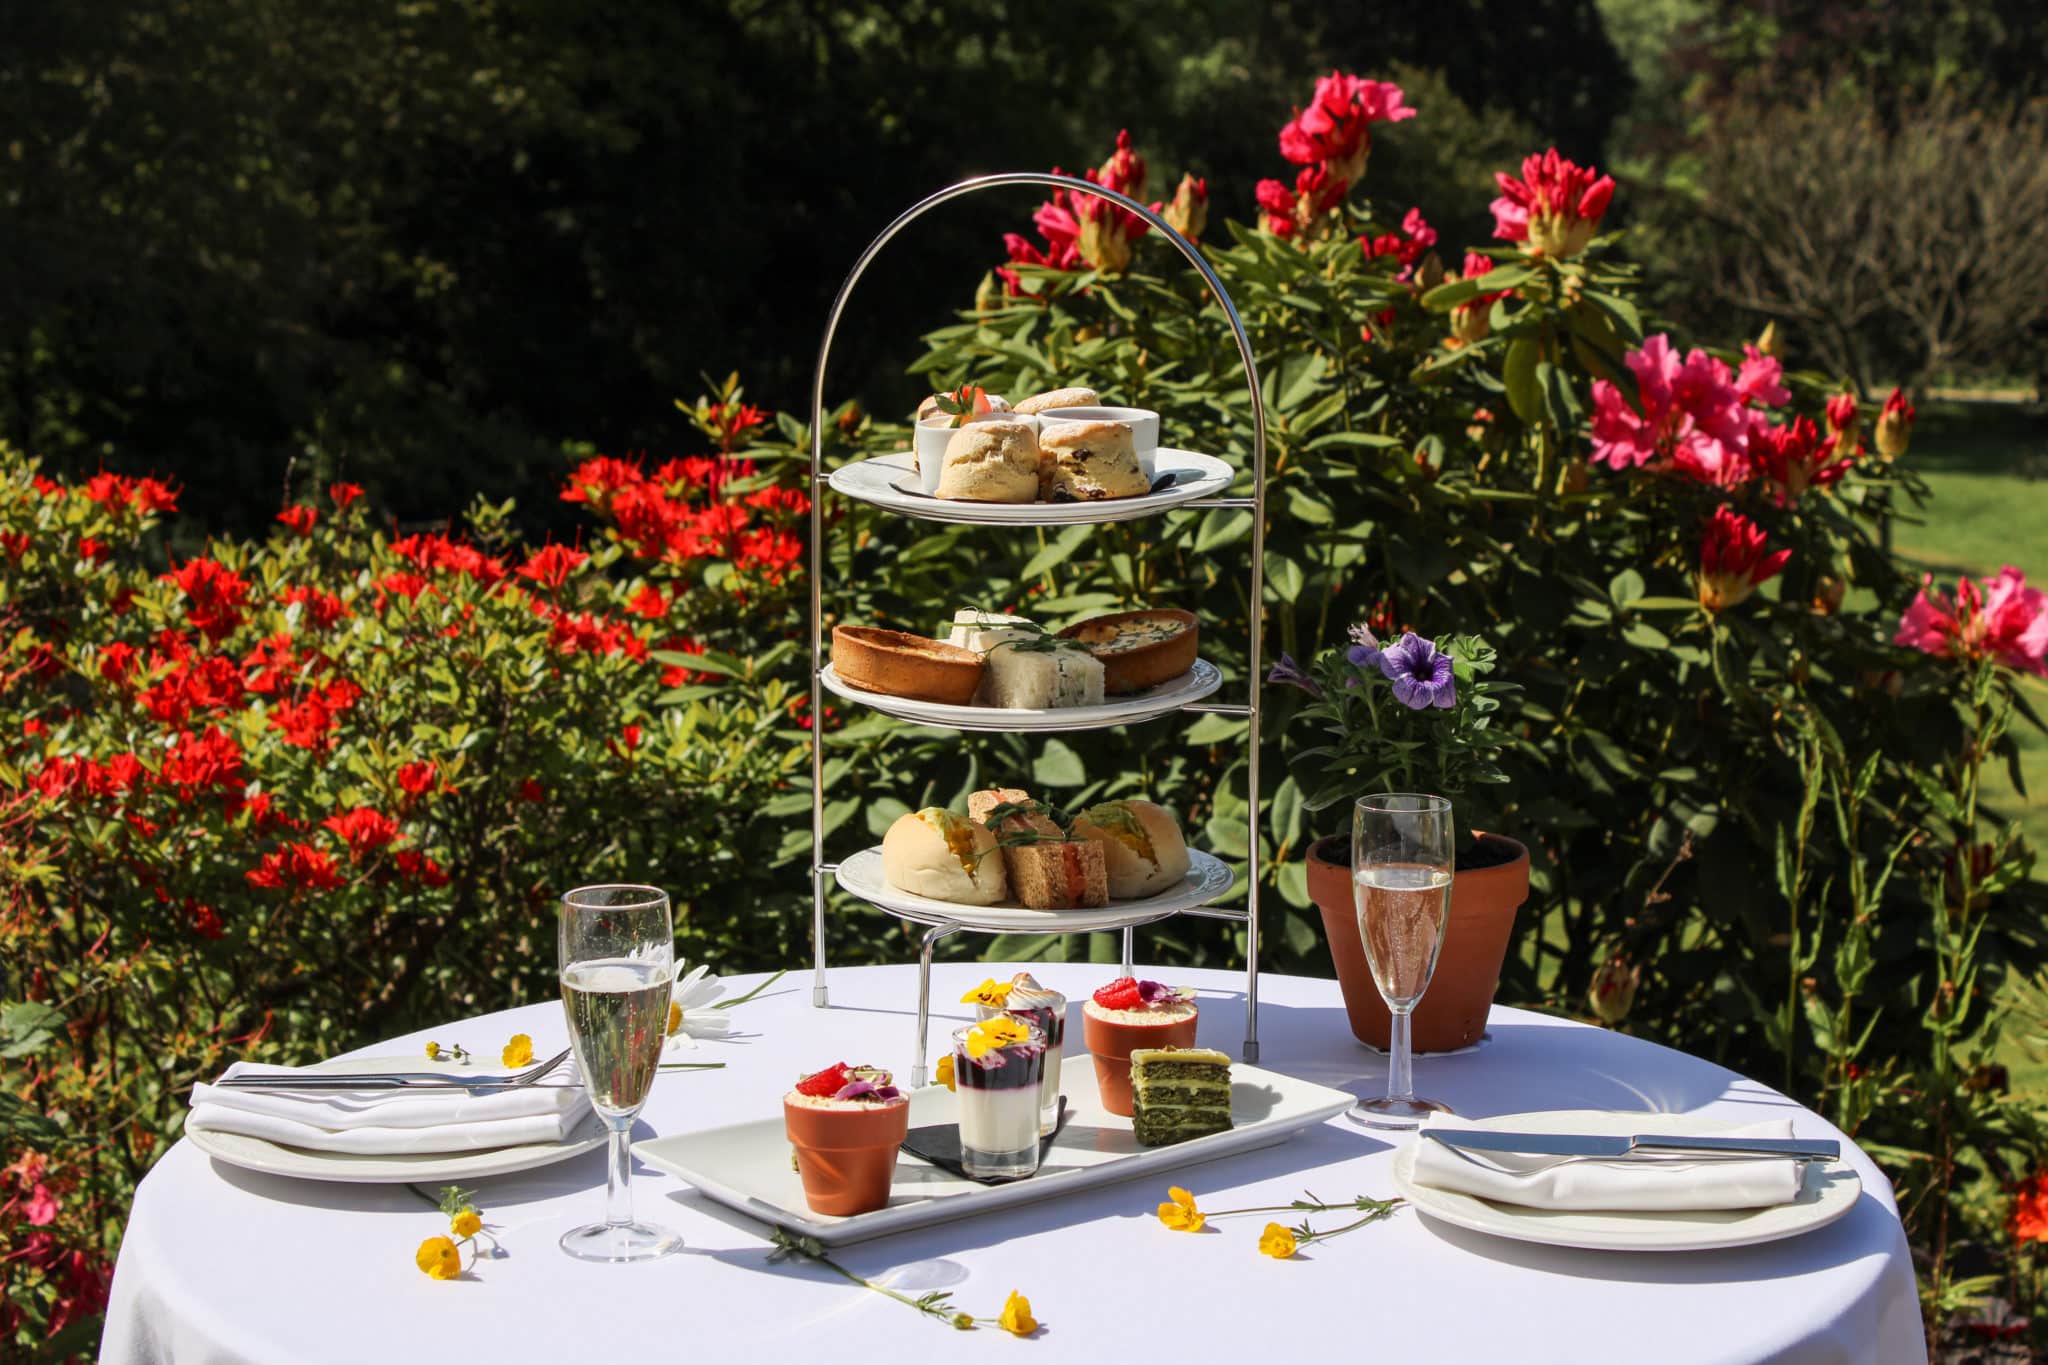 Outdoor Afternoon Tea for two with sandwiches, scones, pastries and champagne